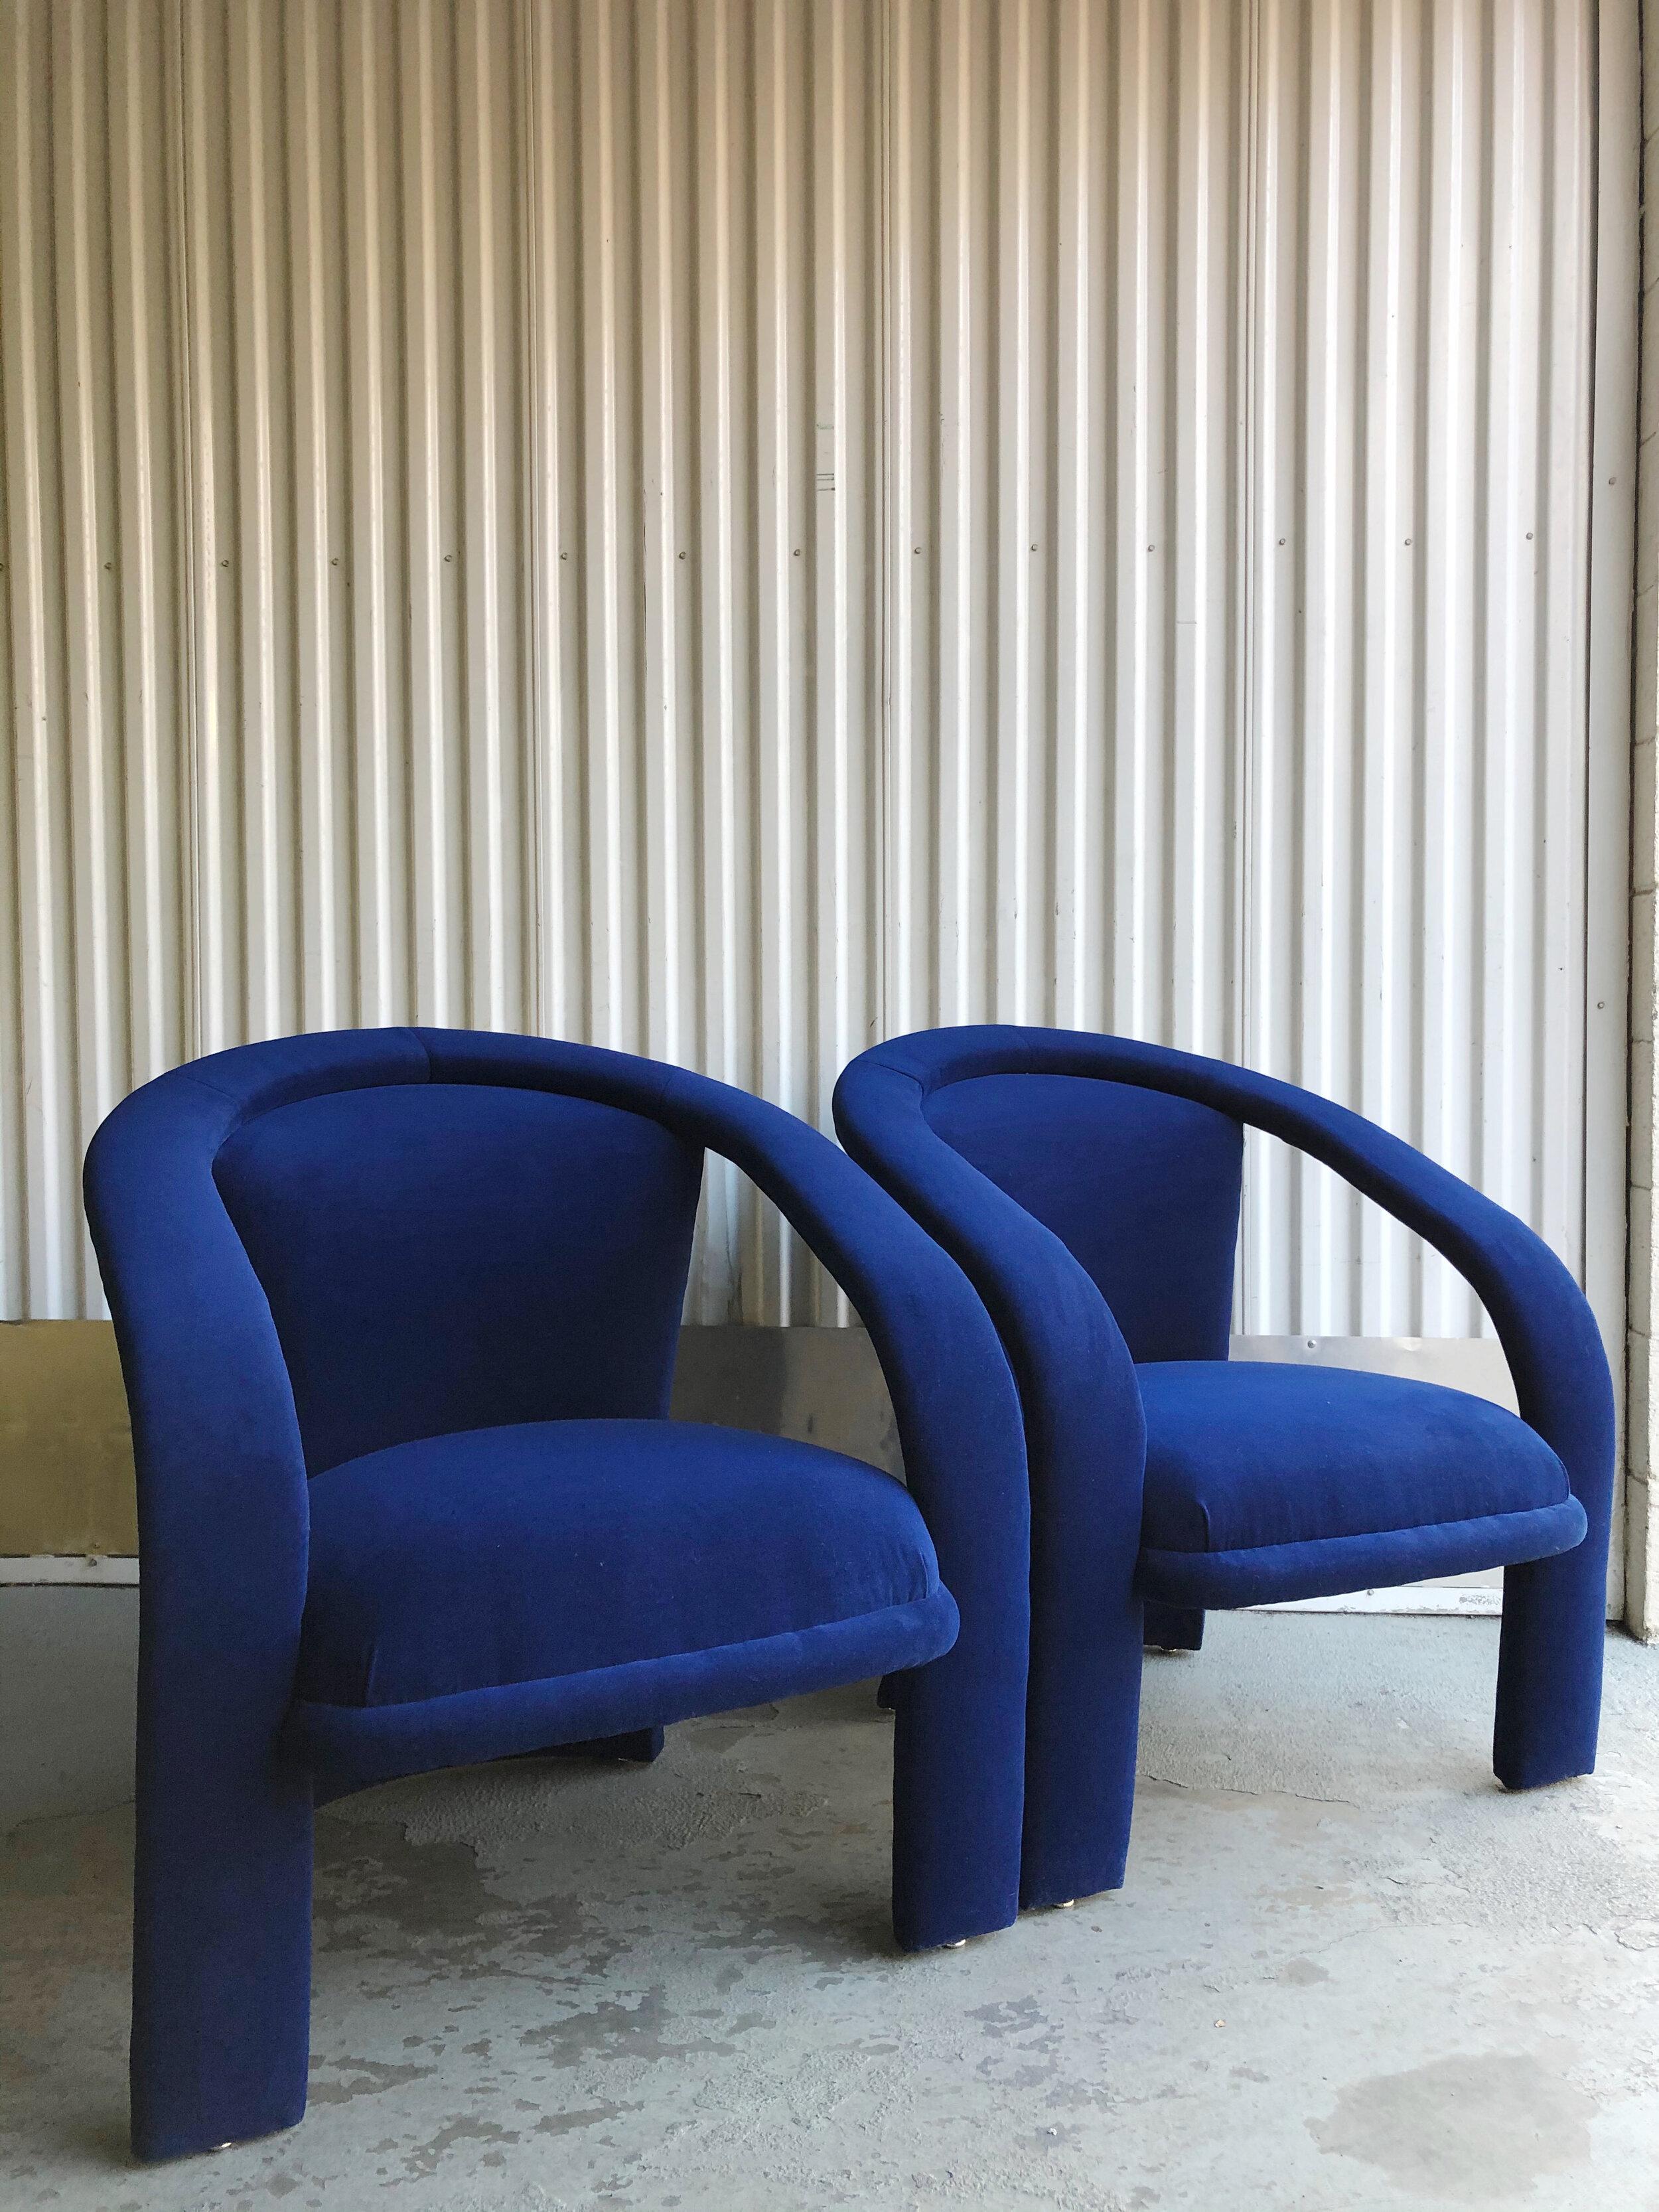 North American Sculptural Post Modern Armchairs After Marge Carson in New Cotton Indigo Velvet